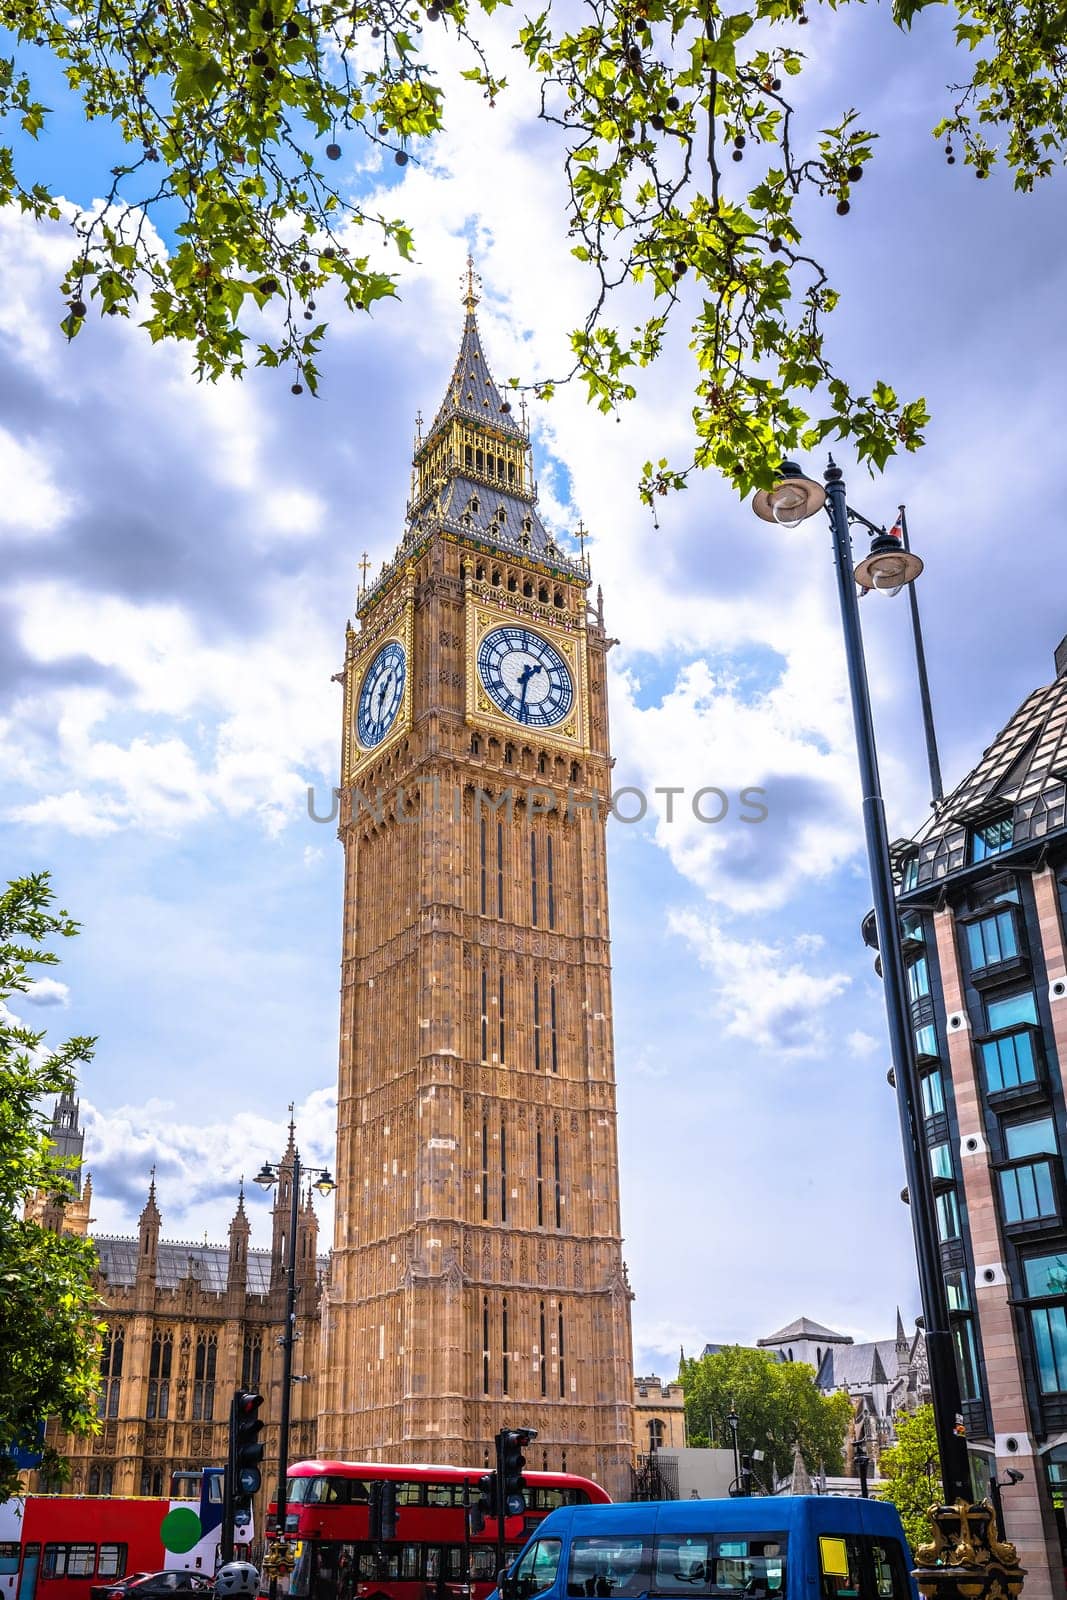 Palace of Westminster and Big Ben view, capital of UK famous landmark